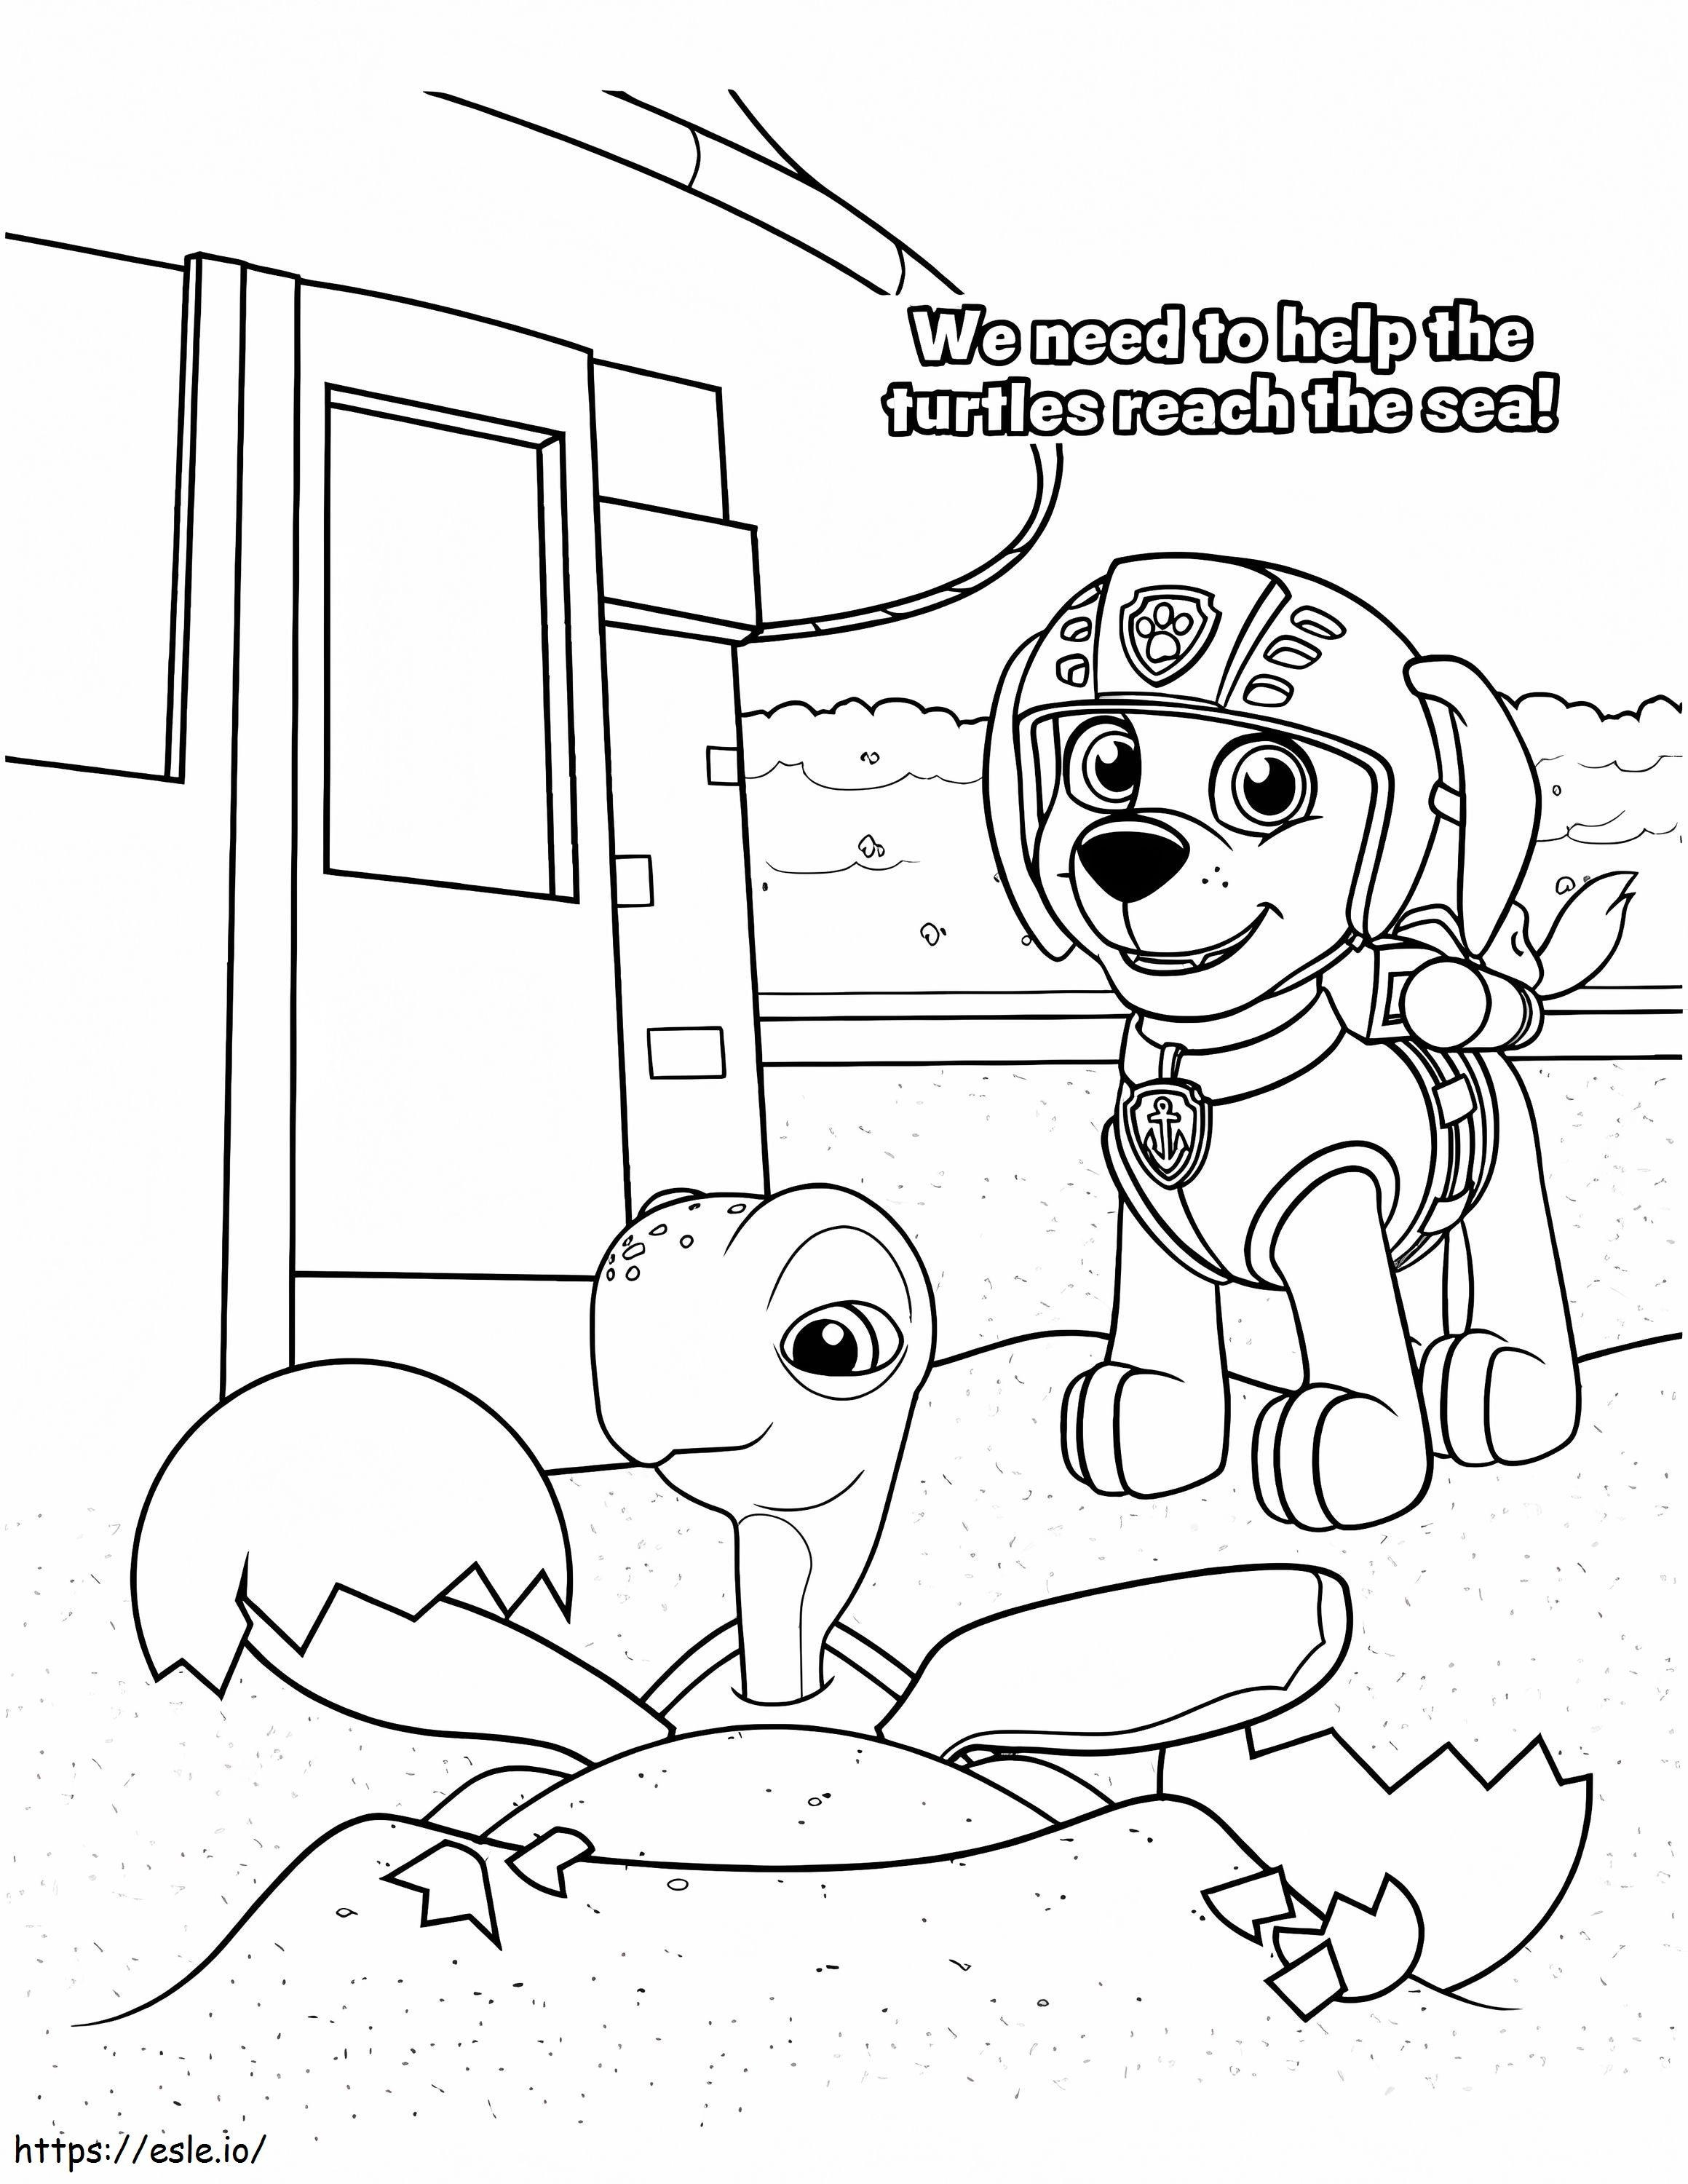 Zuma Paw Patrol Coloring Pages Printable for Free Download